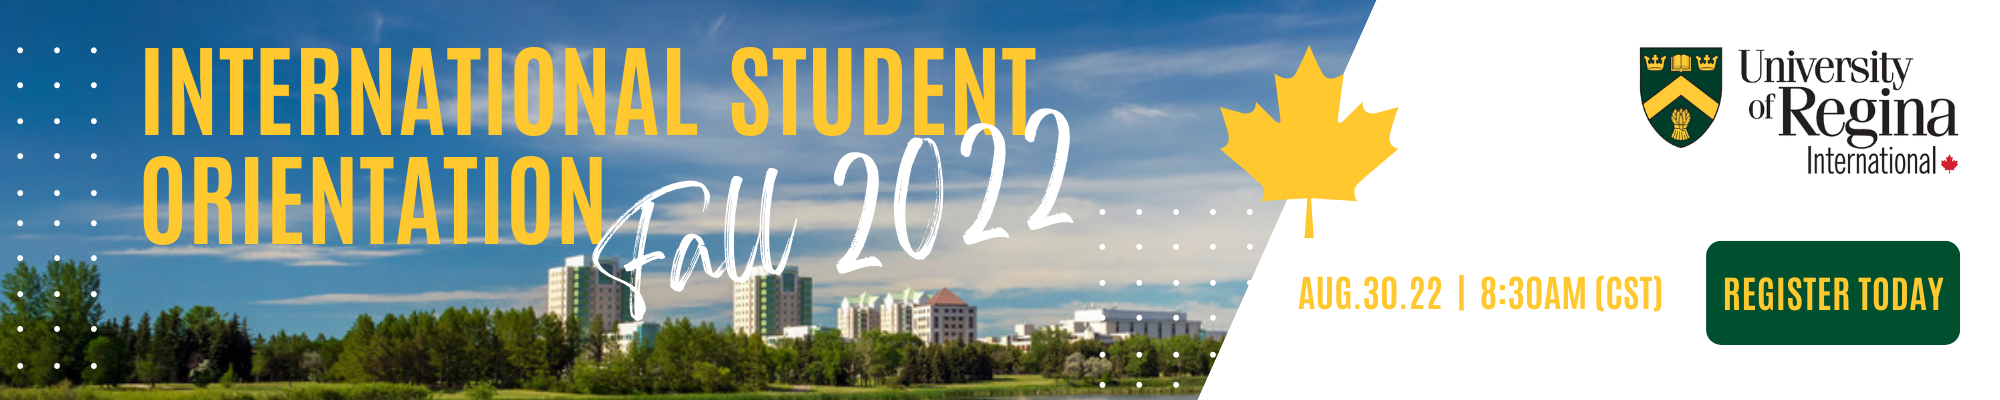 fall-2022-orientation-banner.png